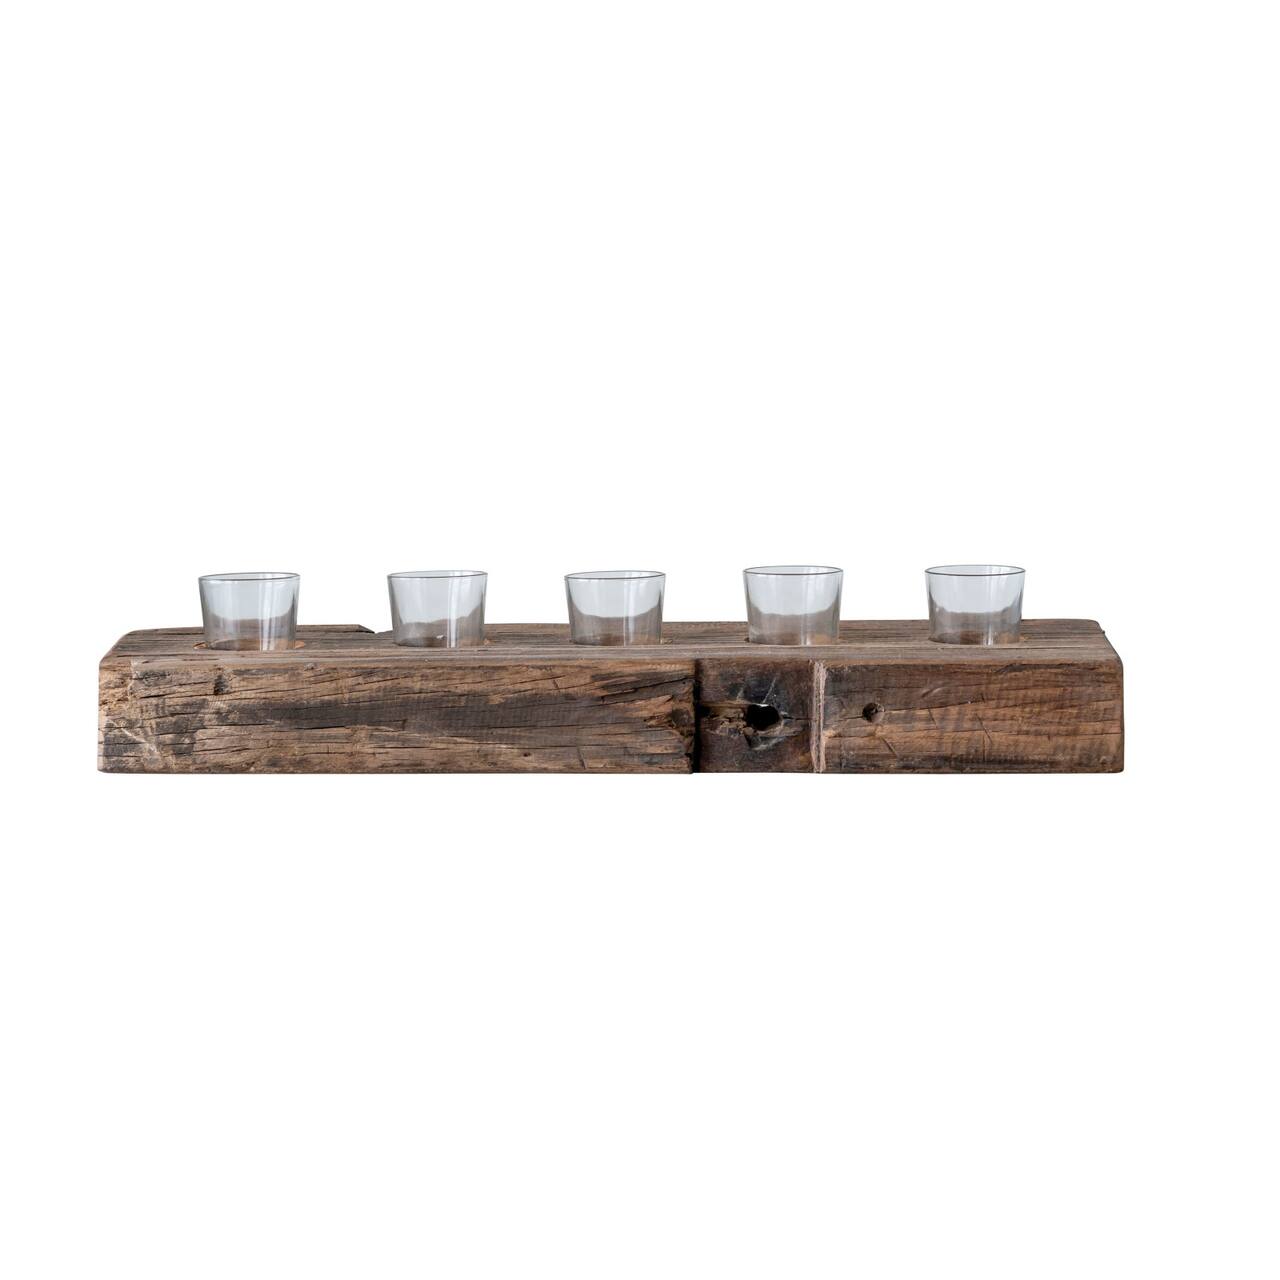 23&#x27;&#x27; Reclaimed Wood Holder with 5 Clear Glass Votives